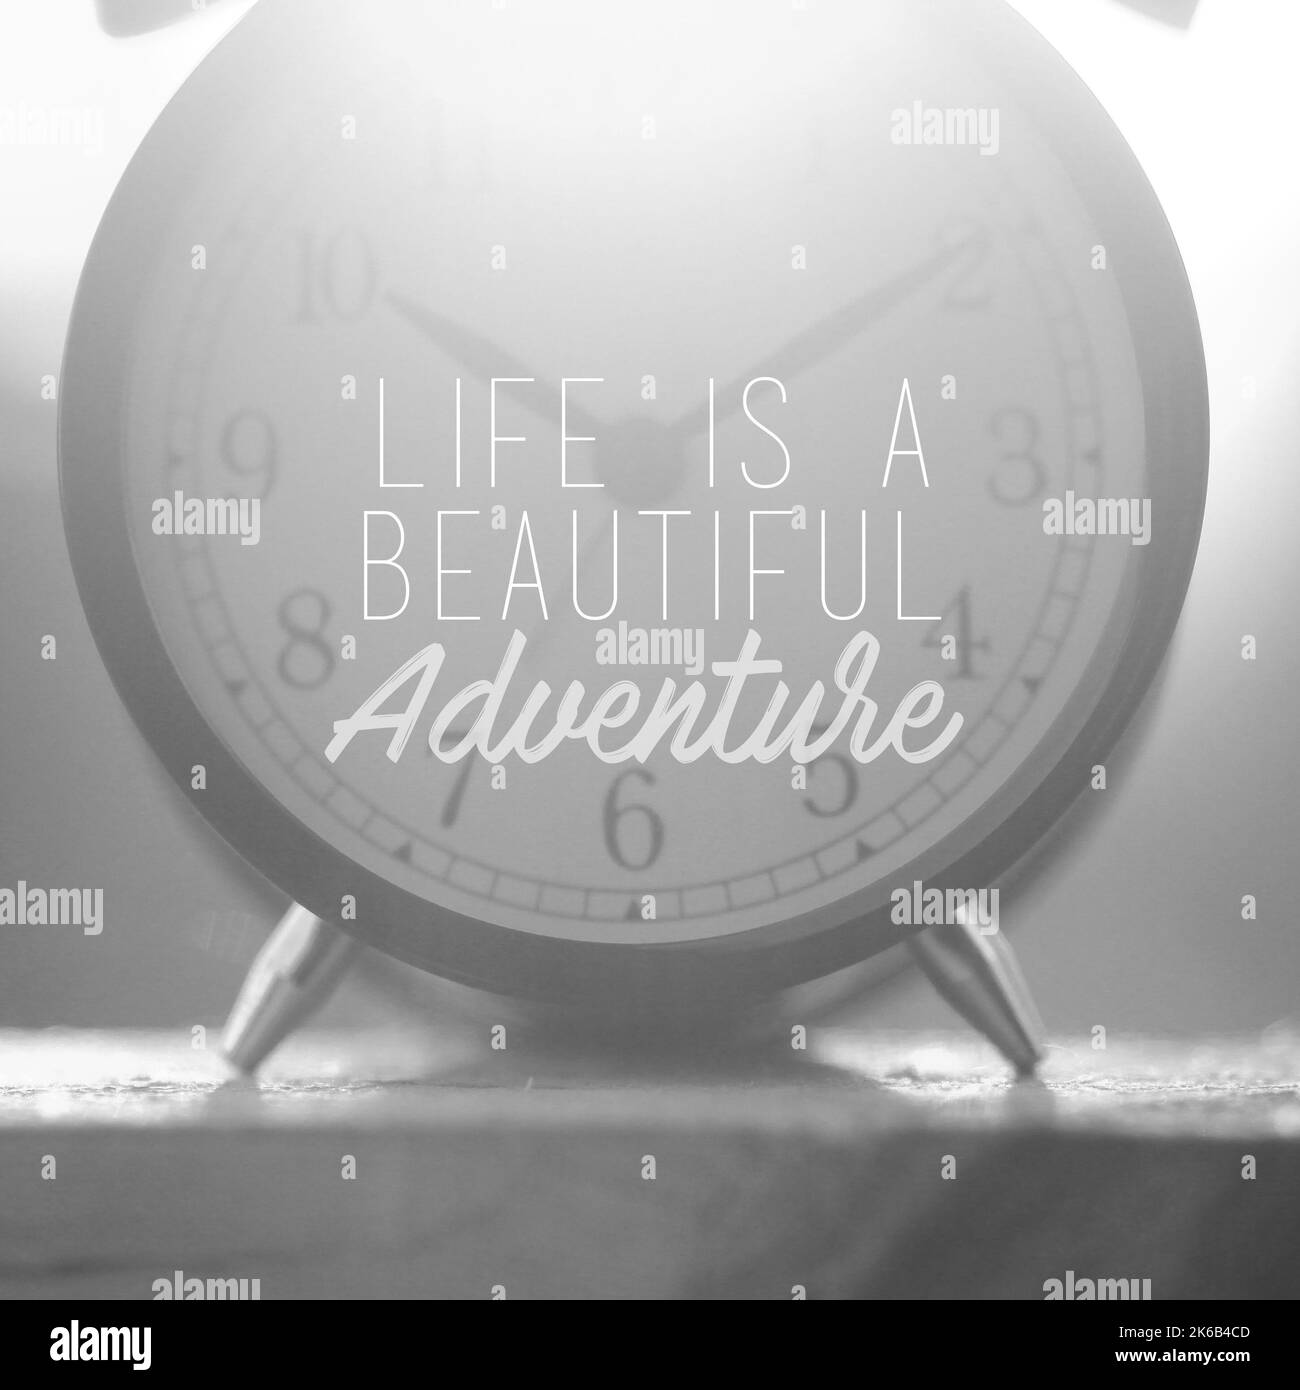 Travel inspirational quotes - Life is a beautiful adventure. Blurry retro styled background. Stock Photo